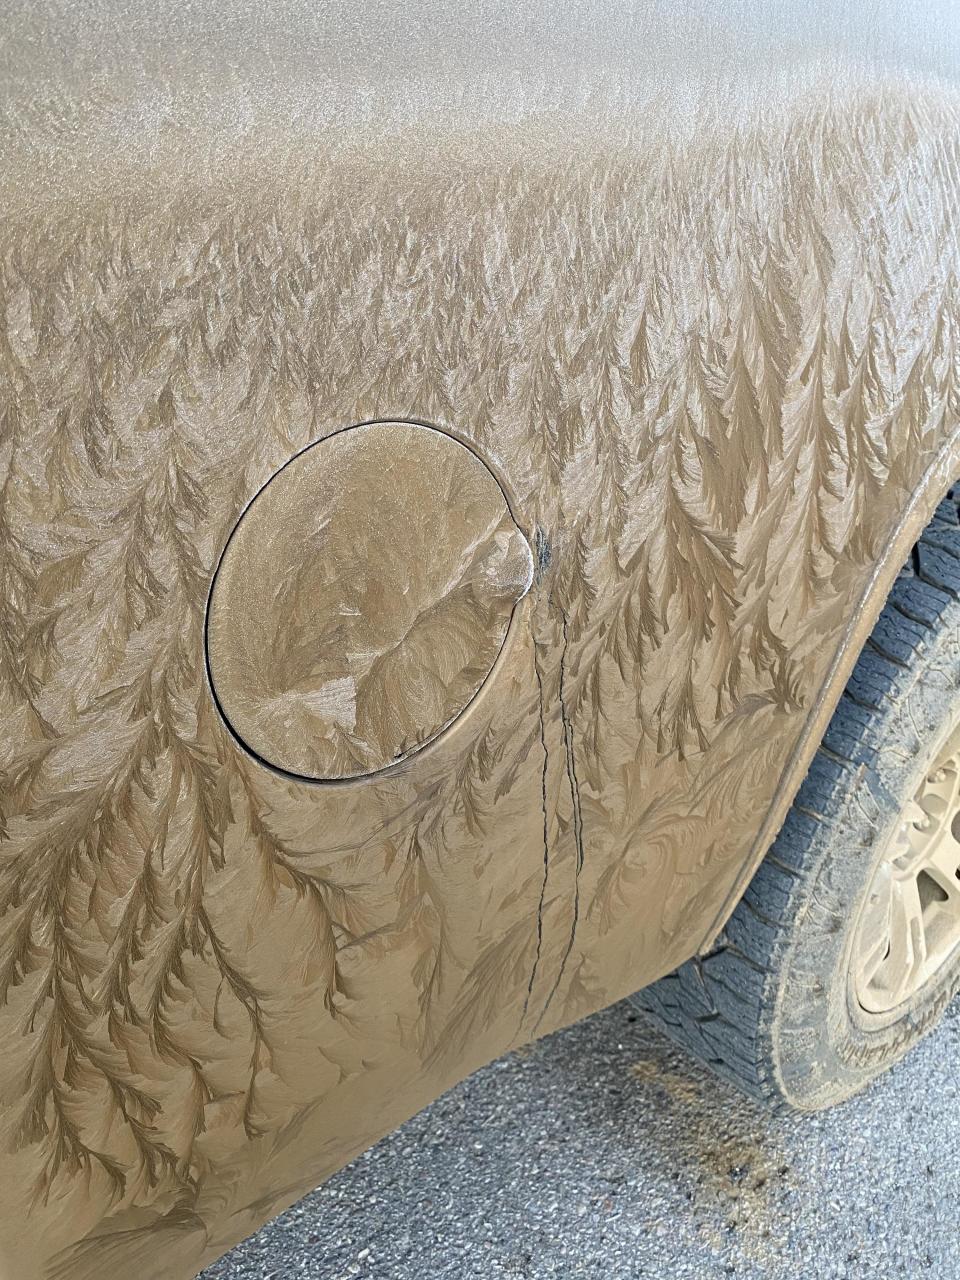 frozen mud on the side of a truck with sharp points making a pattern looking like trees in a forest